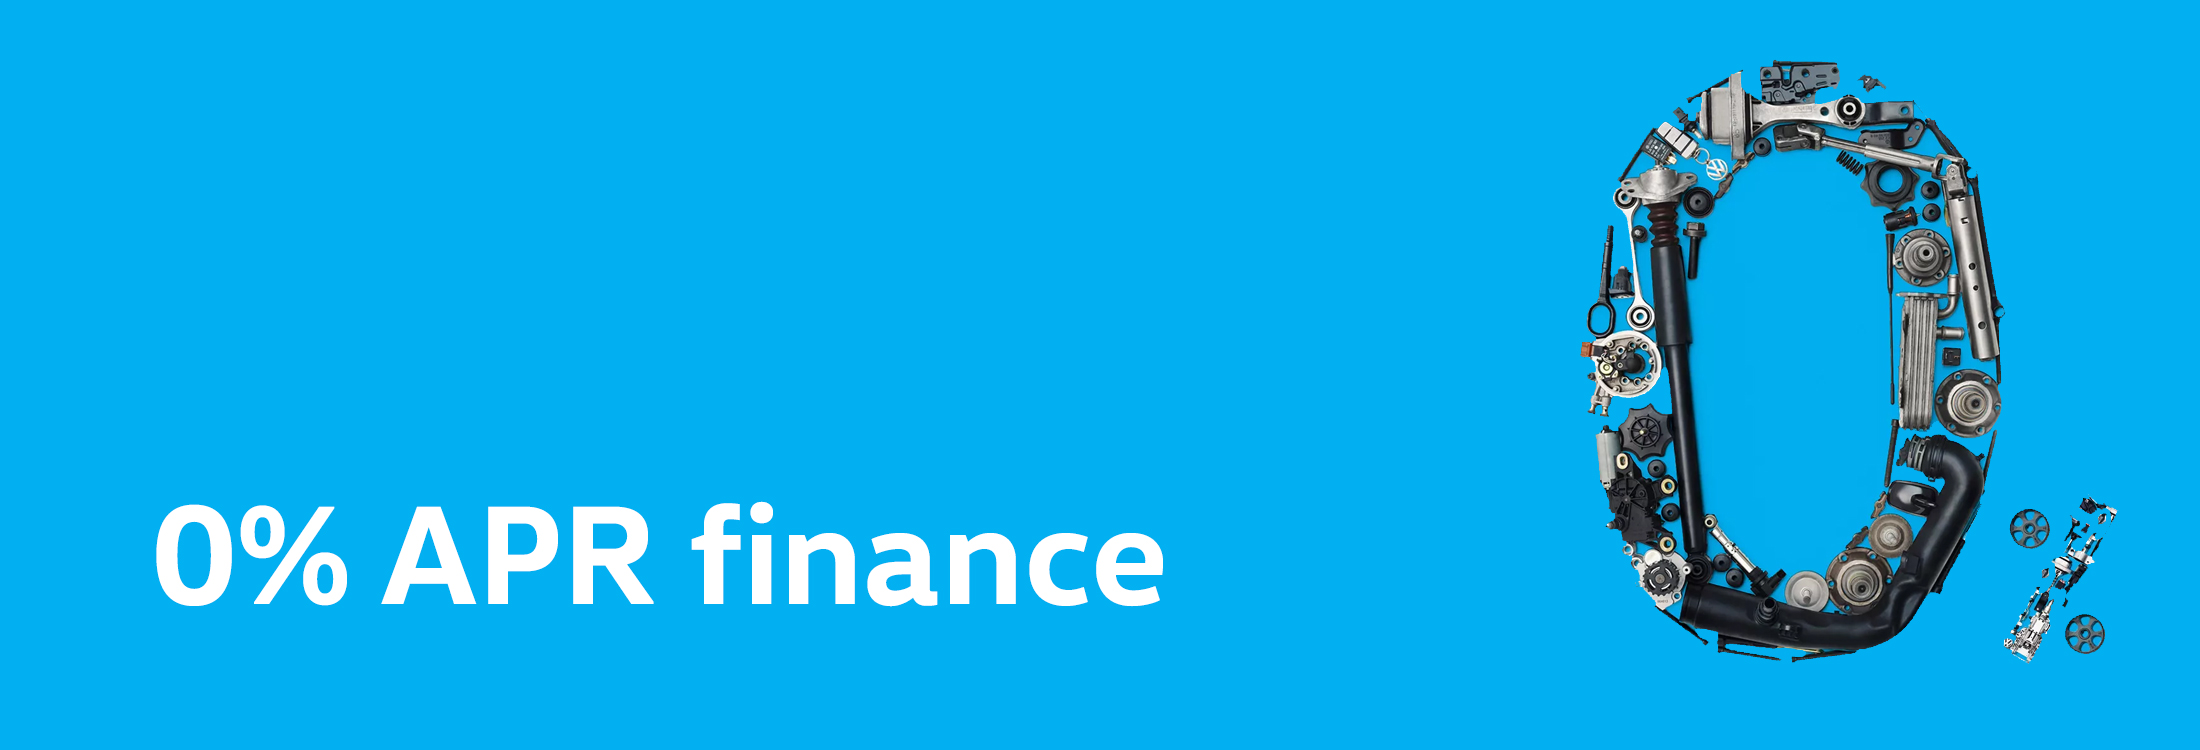 0% APR finance on service maintenance and repairs